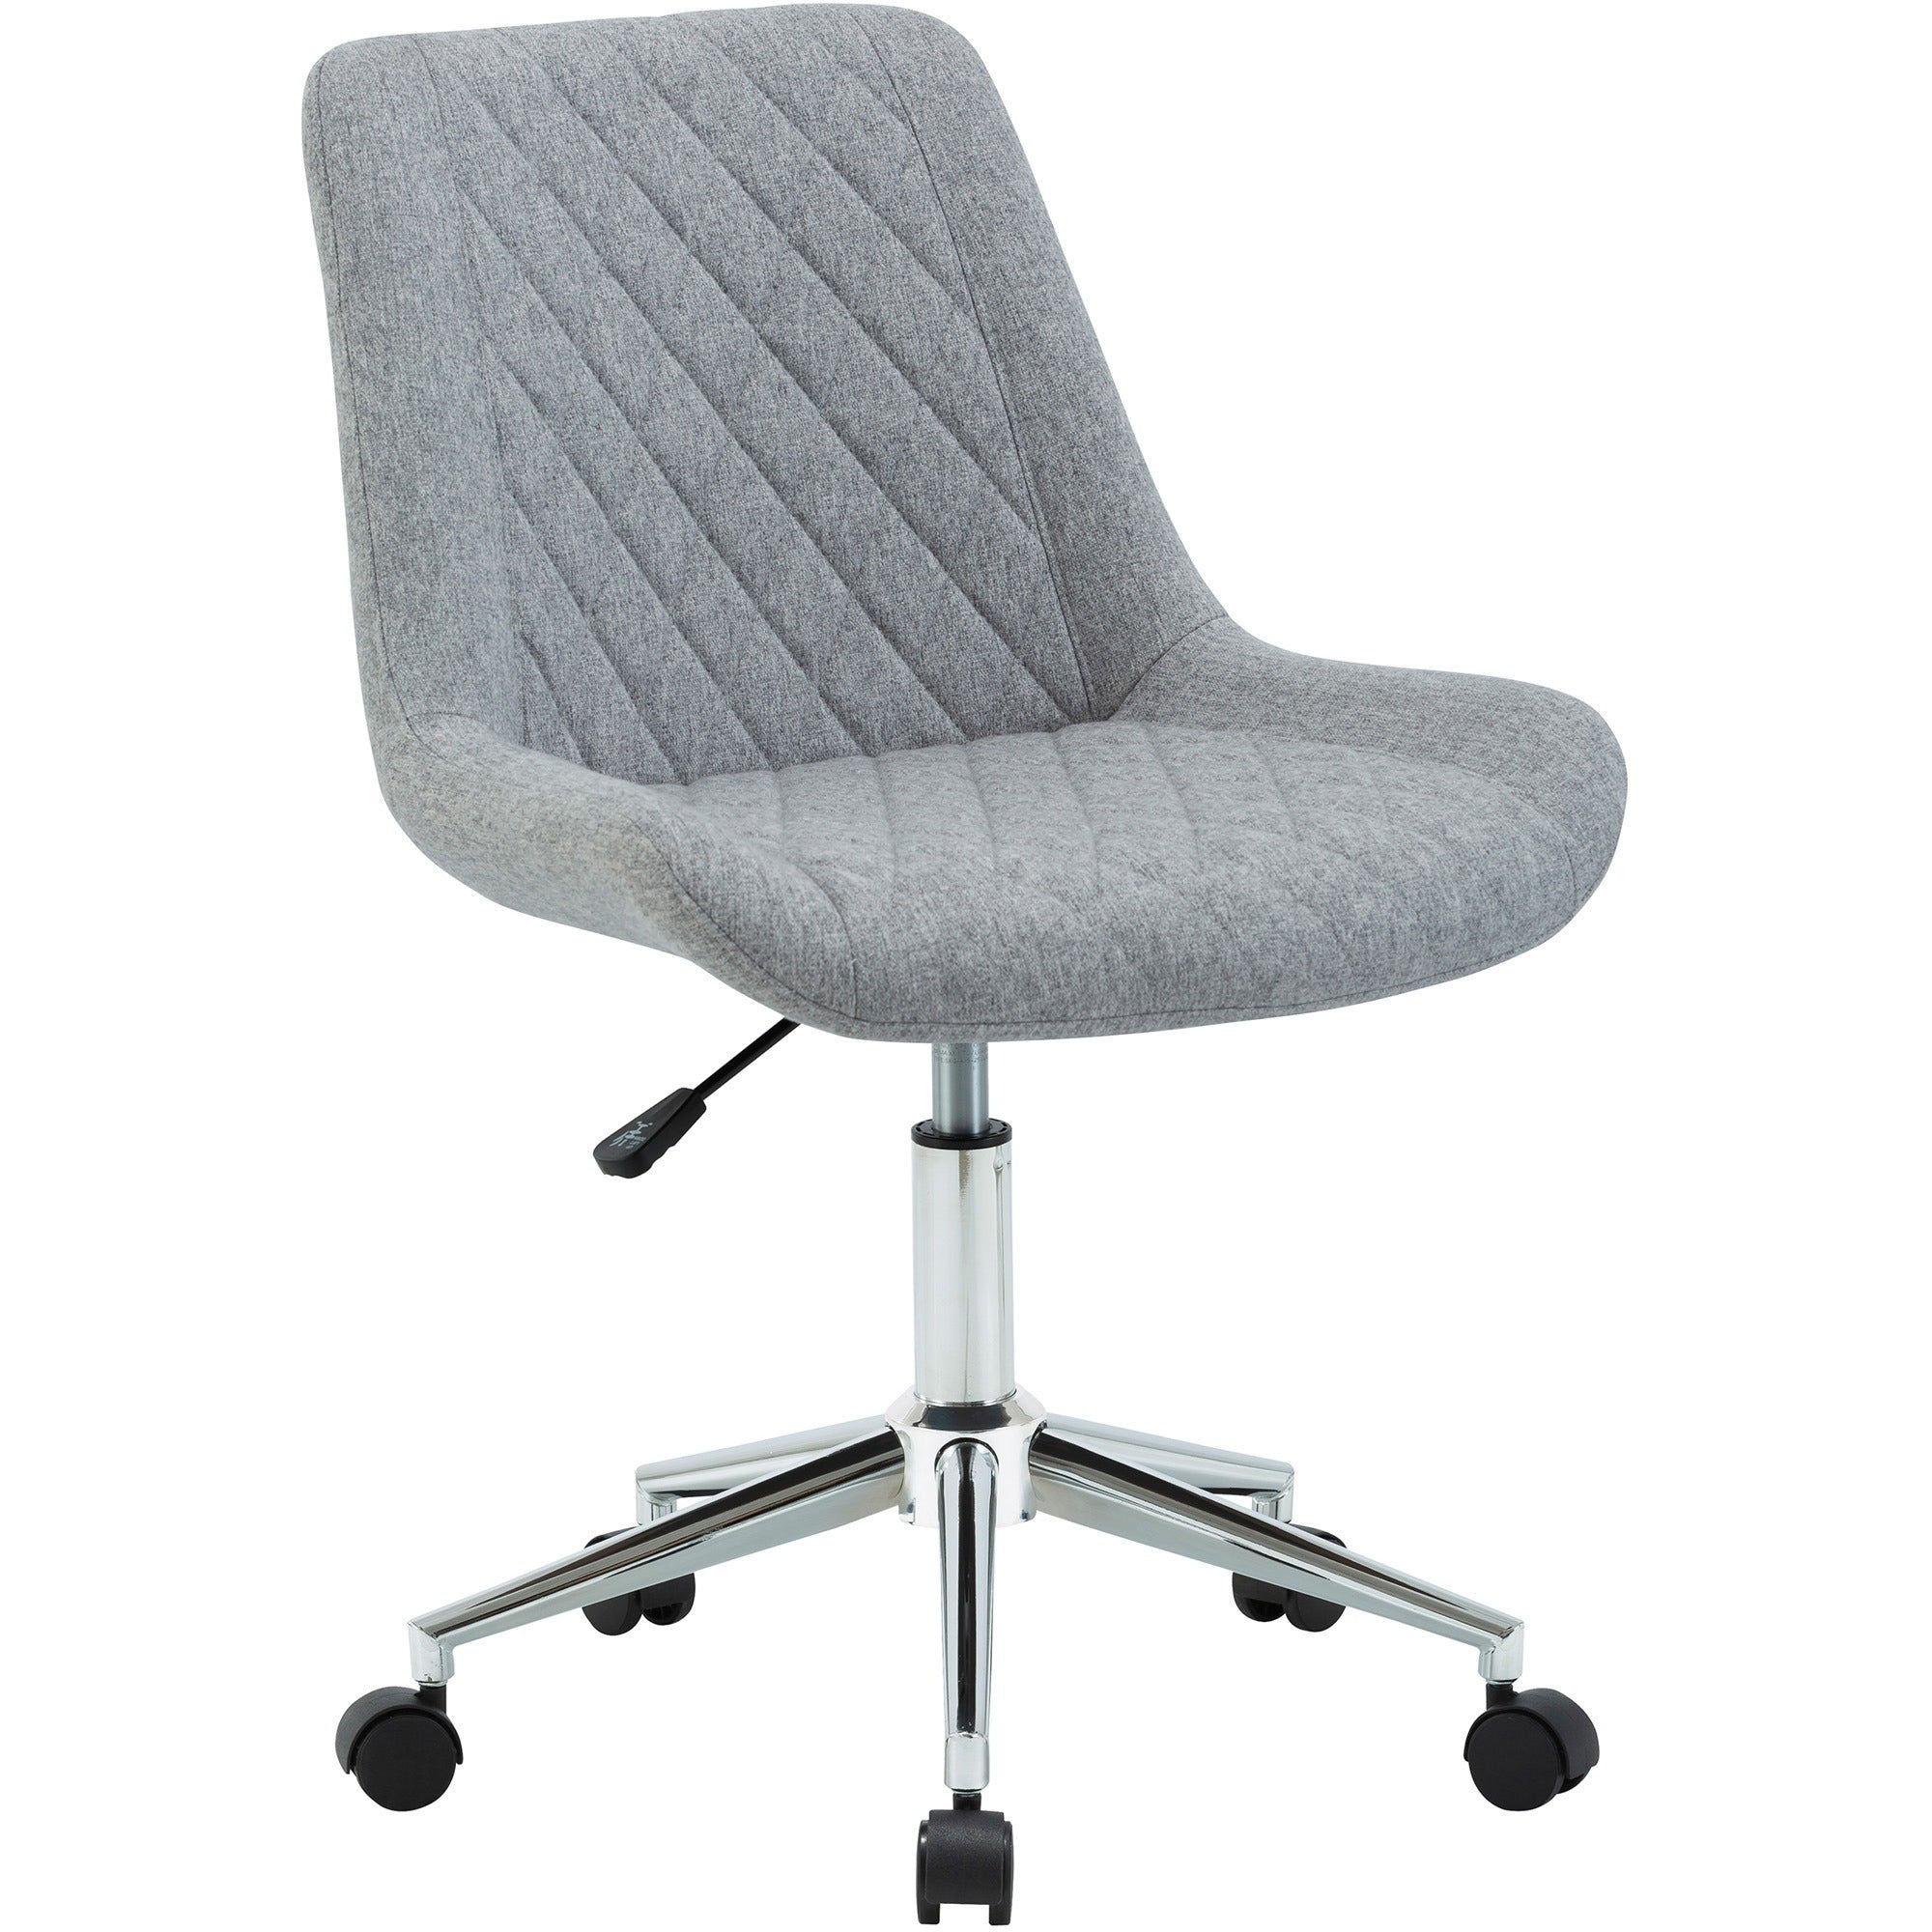 lys-low-back-office-chair-gray-plywood-fabric-seat-gray-plywood-fabric-back-low-back-1-each_lysch304fngy - 1